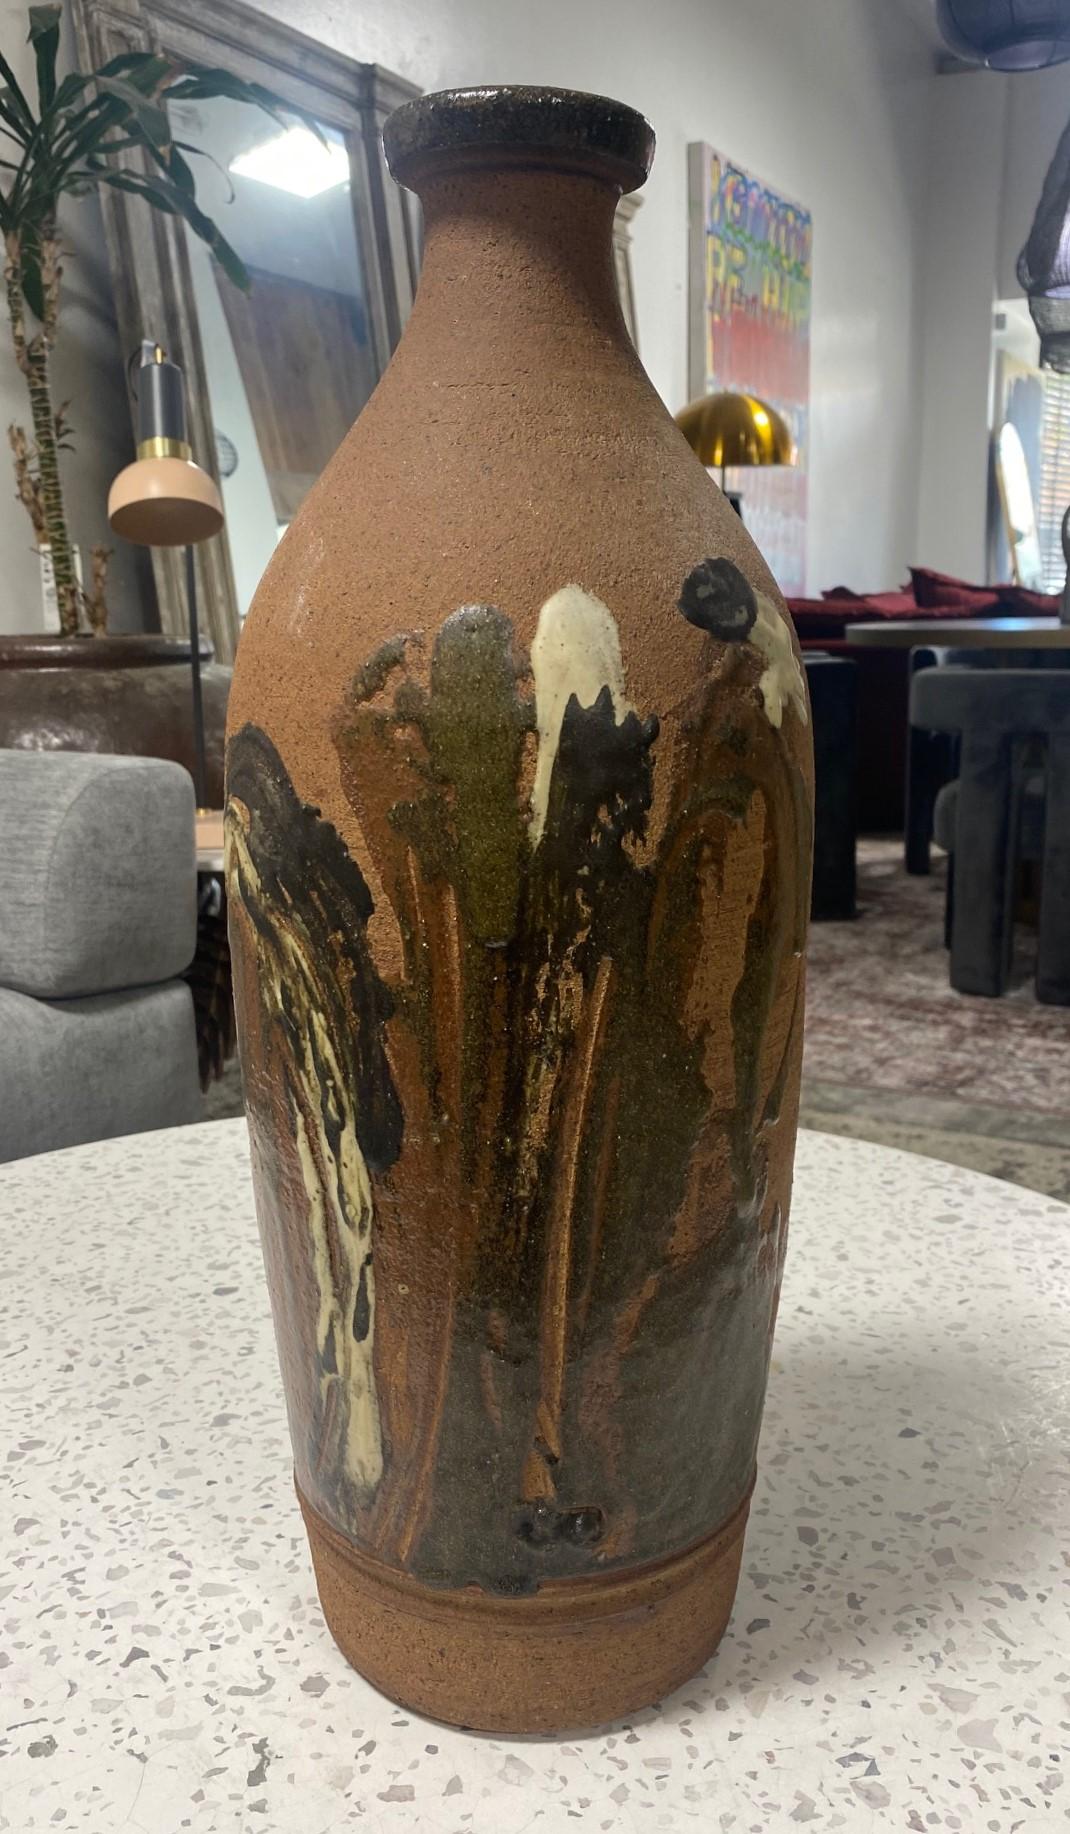 A wonderful, richly multi-glazed and textured, heavy Mid-Century Modern large stoneware bottle vase. Expertly crafted. The piece is very reminiscent of some of Peter Voulkos' early hand-painted works with traditional shaped vessels, though we